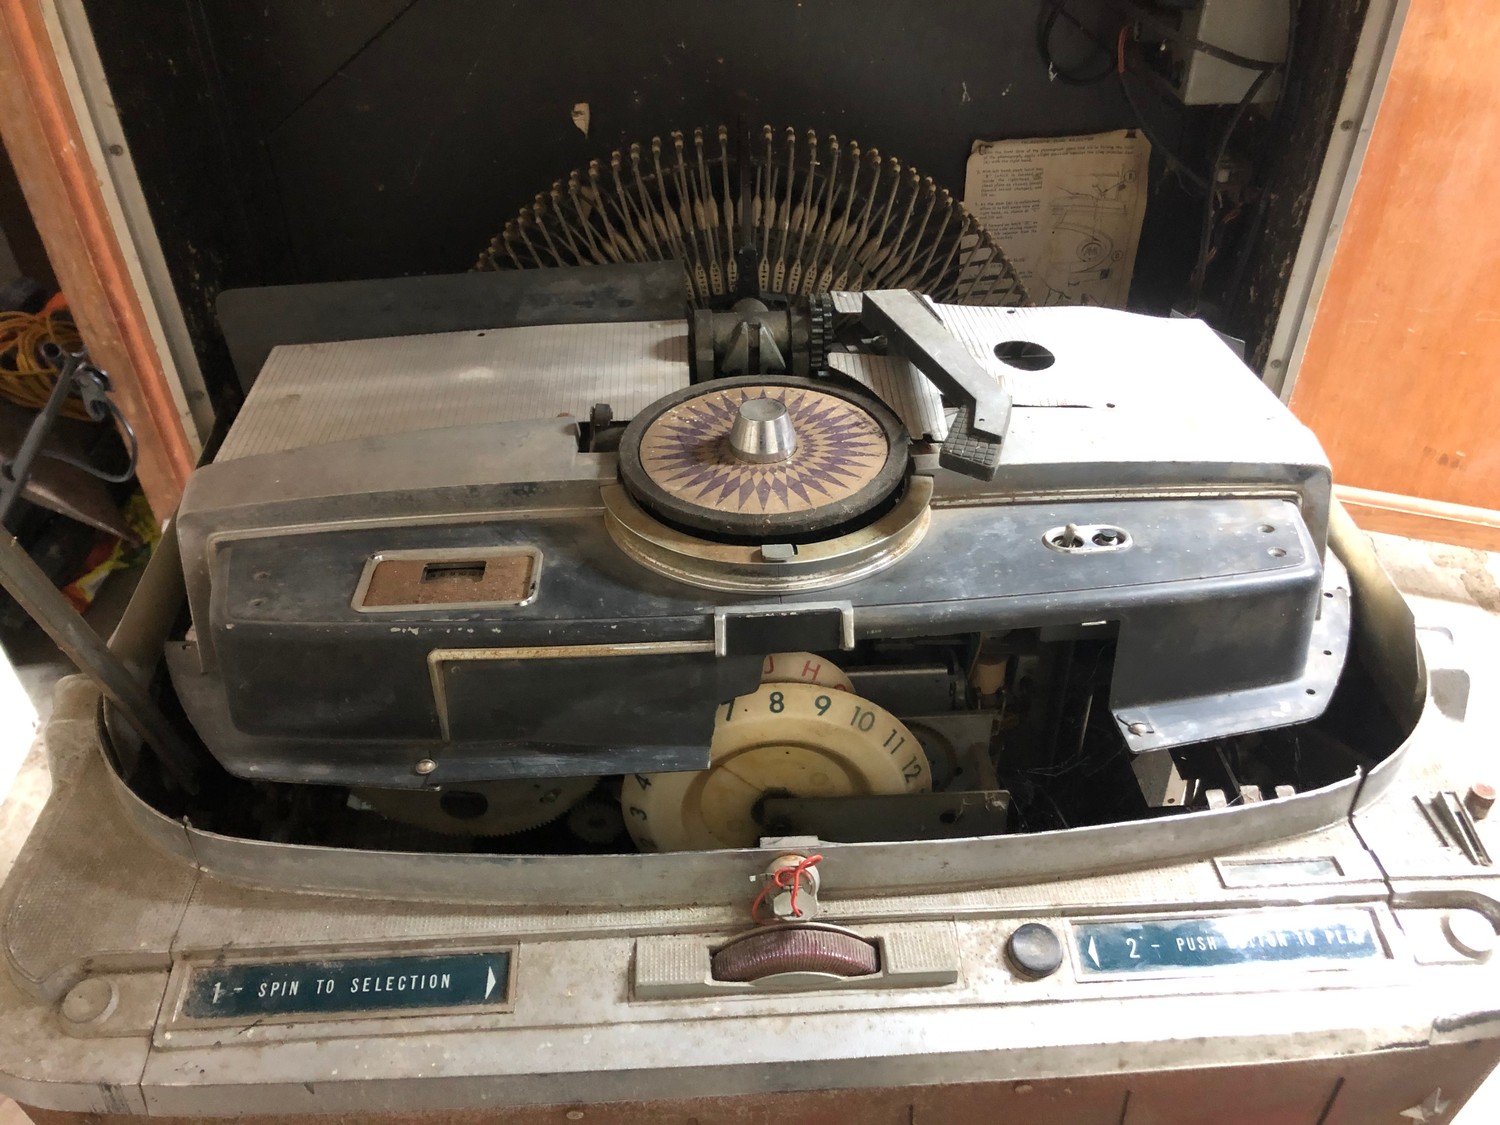 Rare 1950s Bal-AMi 200 Jukebox in "Barn Find" condition and in need of complete restoration, - Image 7 of 27